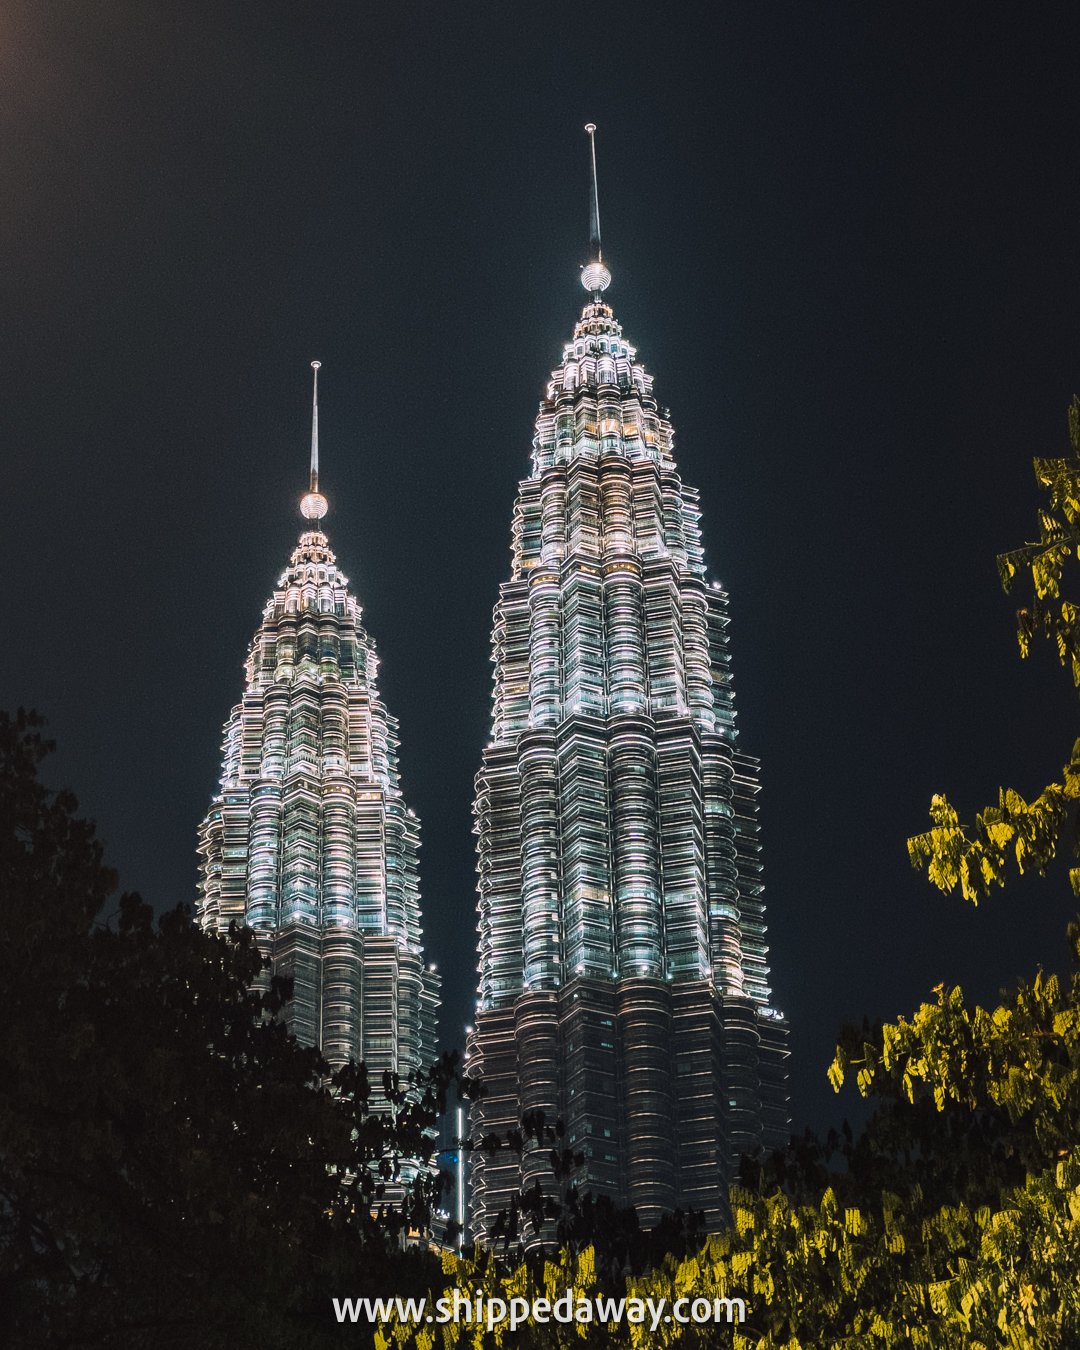 Petronas Twin Towers, a top attraction to visit in Kuala Lumpur, Malaysia